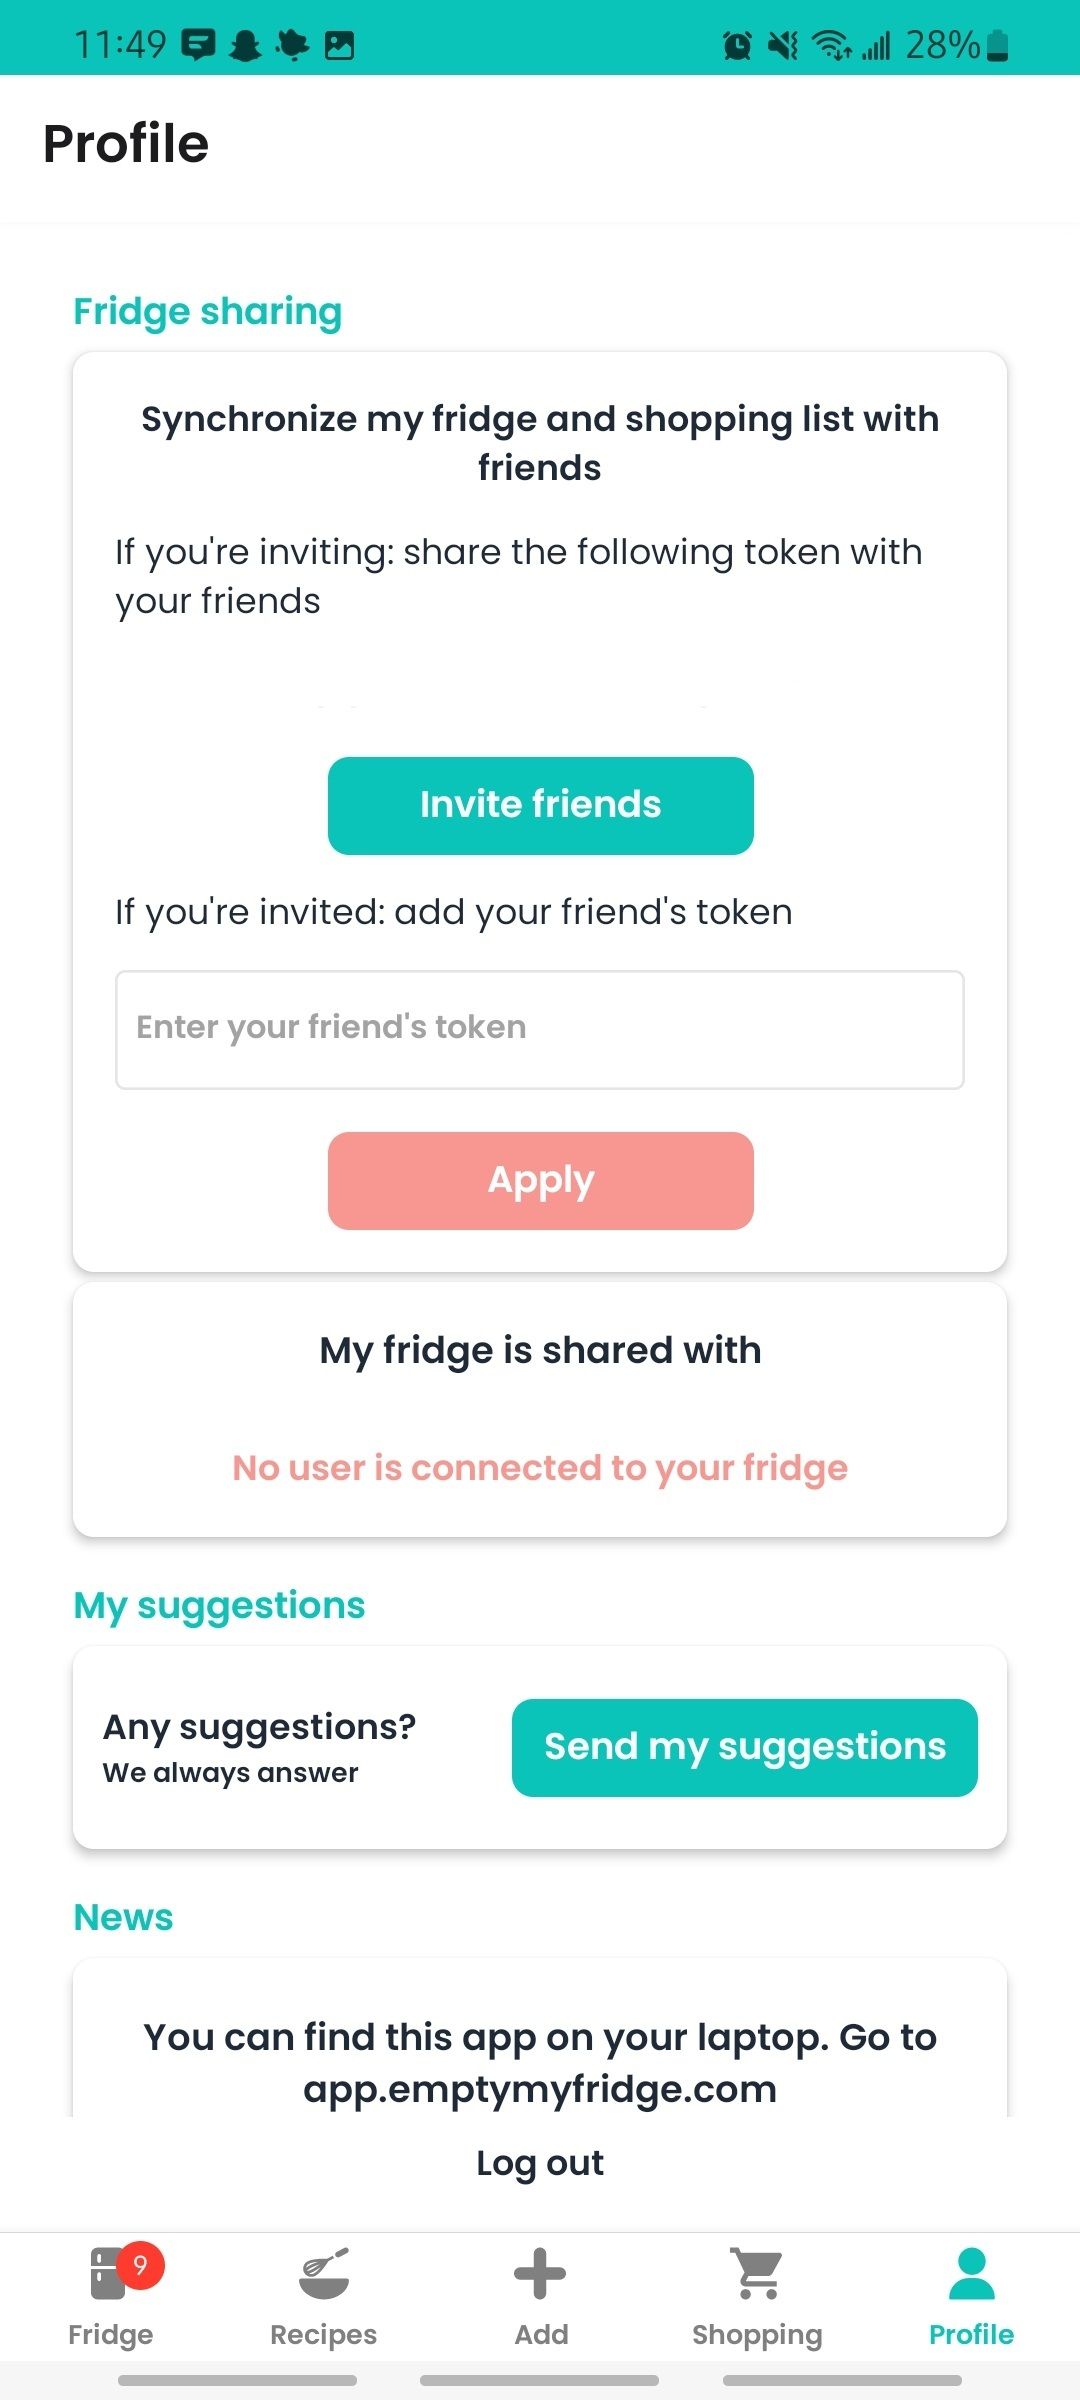 profile settings where you can share your fridge and shopping list with friends